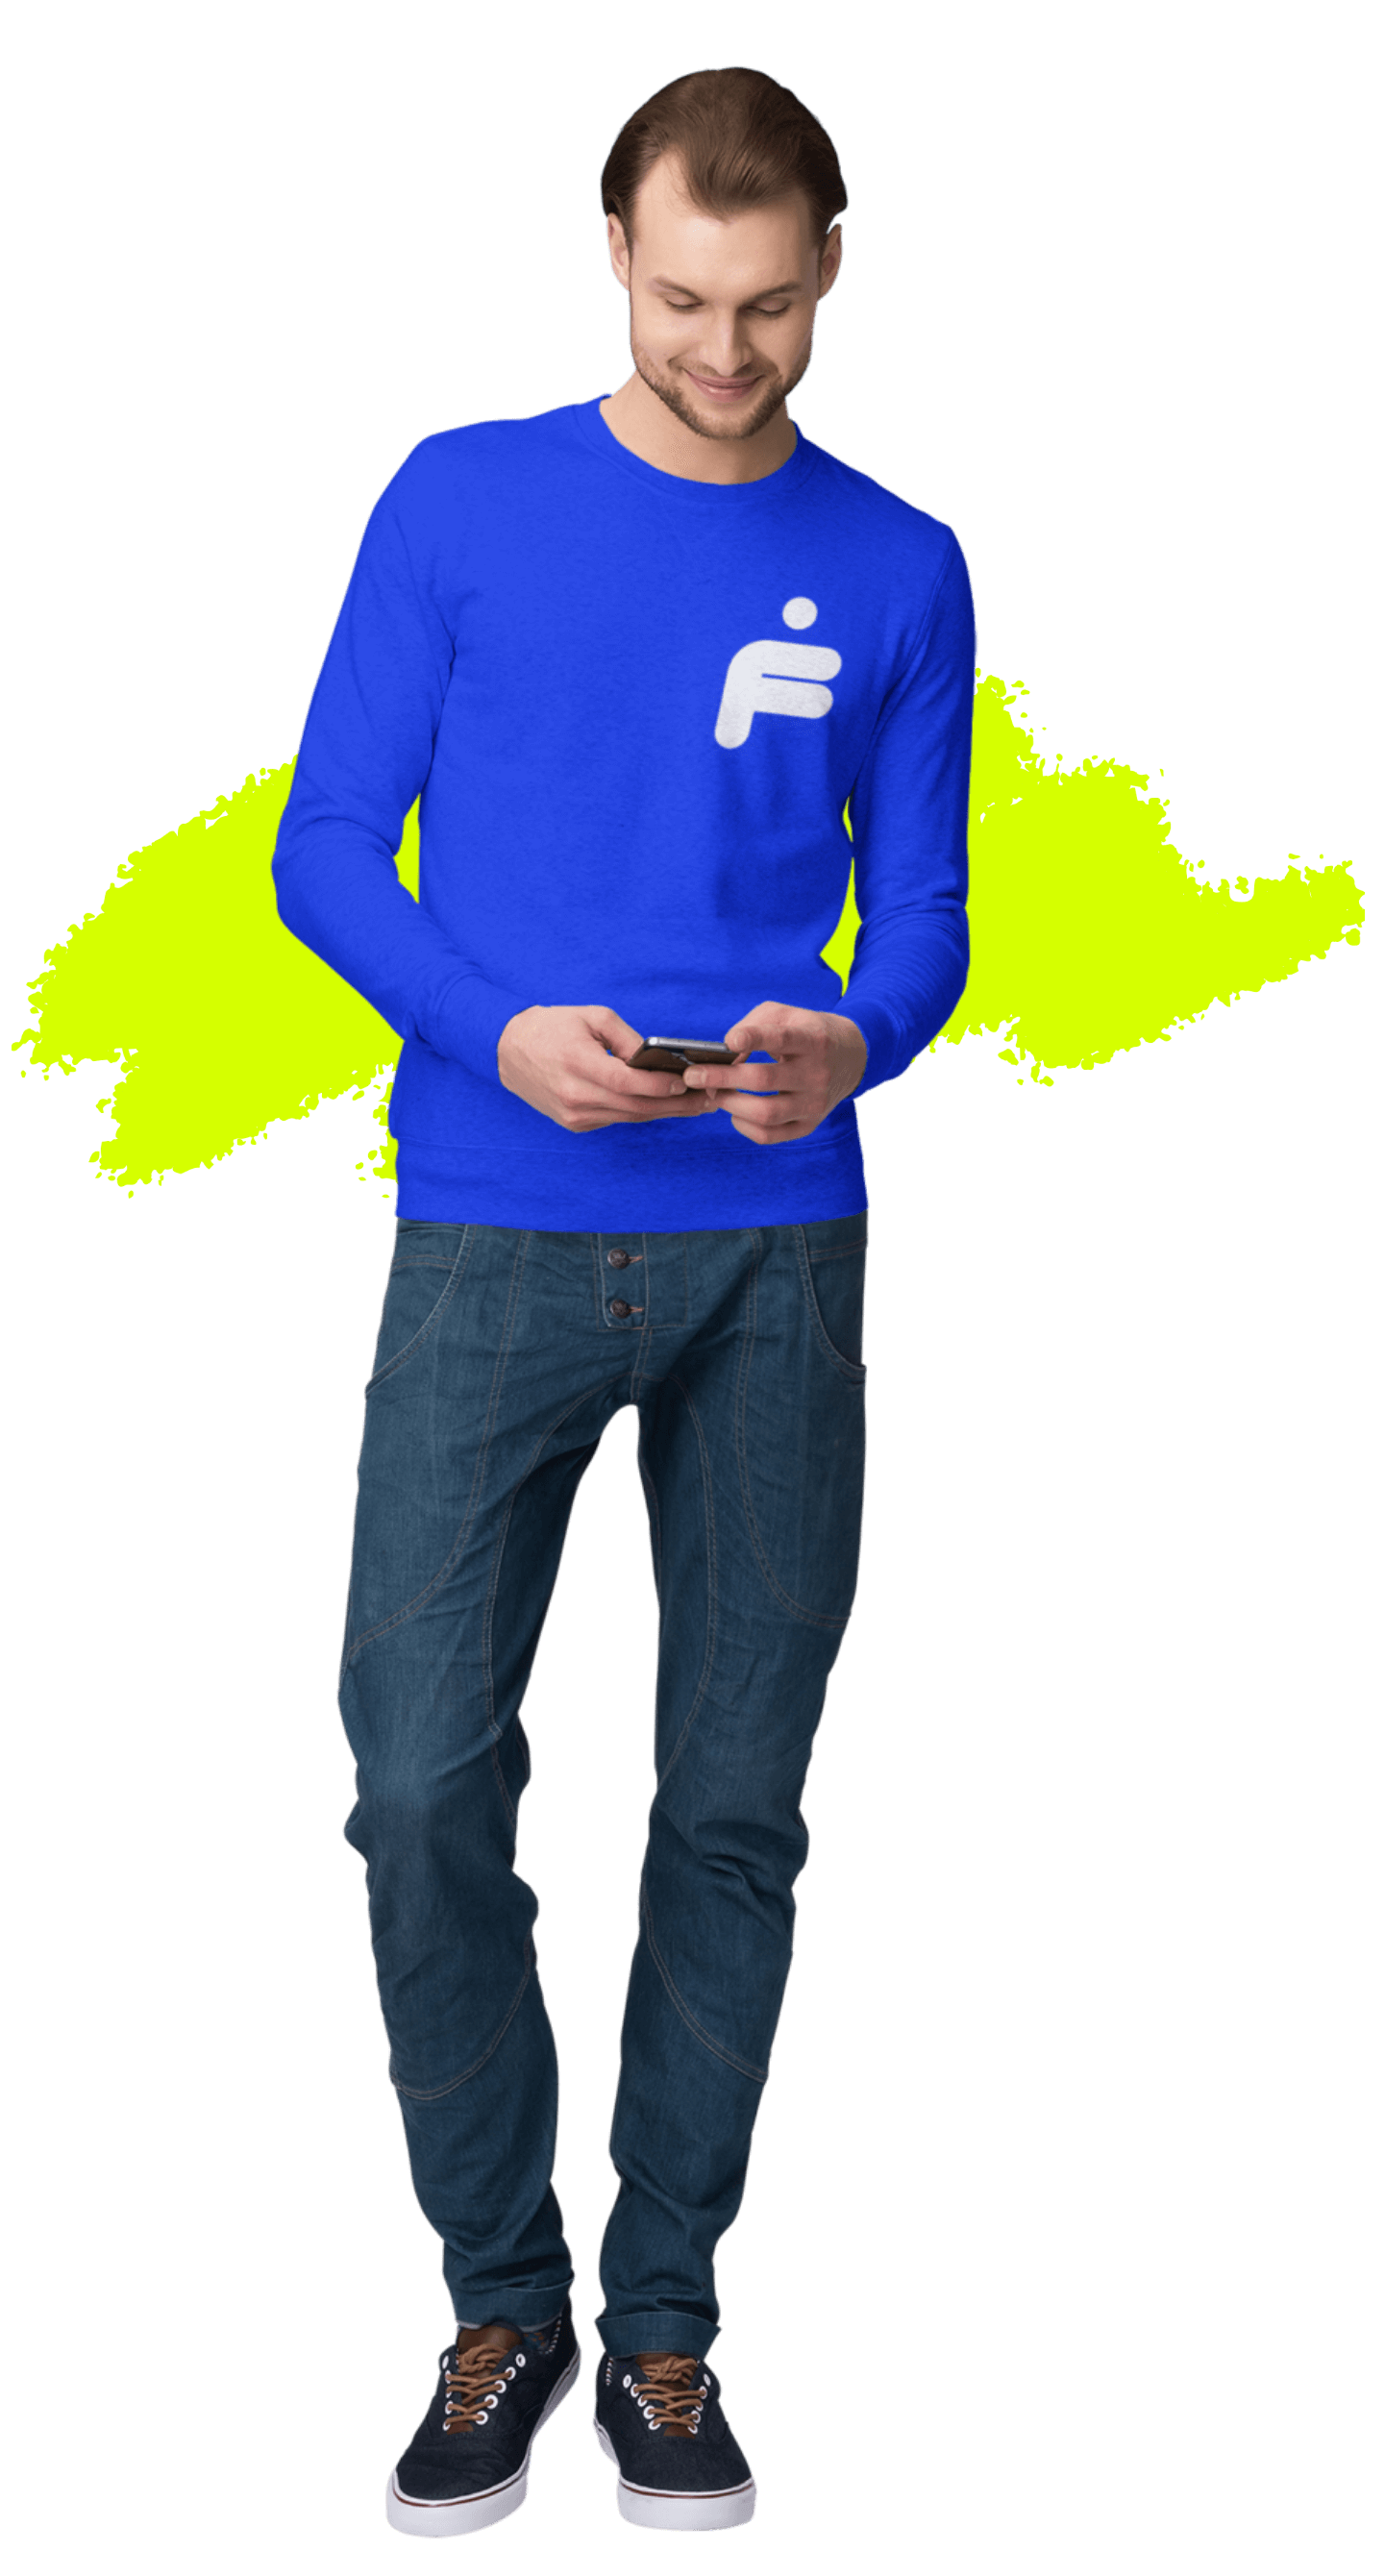 Young man wearing a FreeMii t-shirt while holding a mobile phone